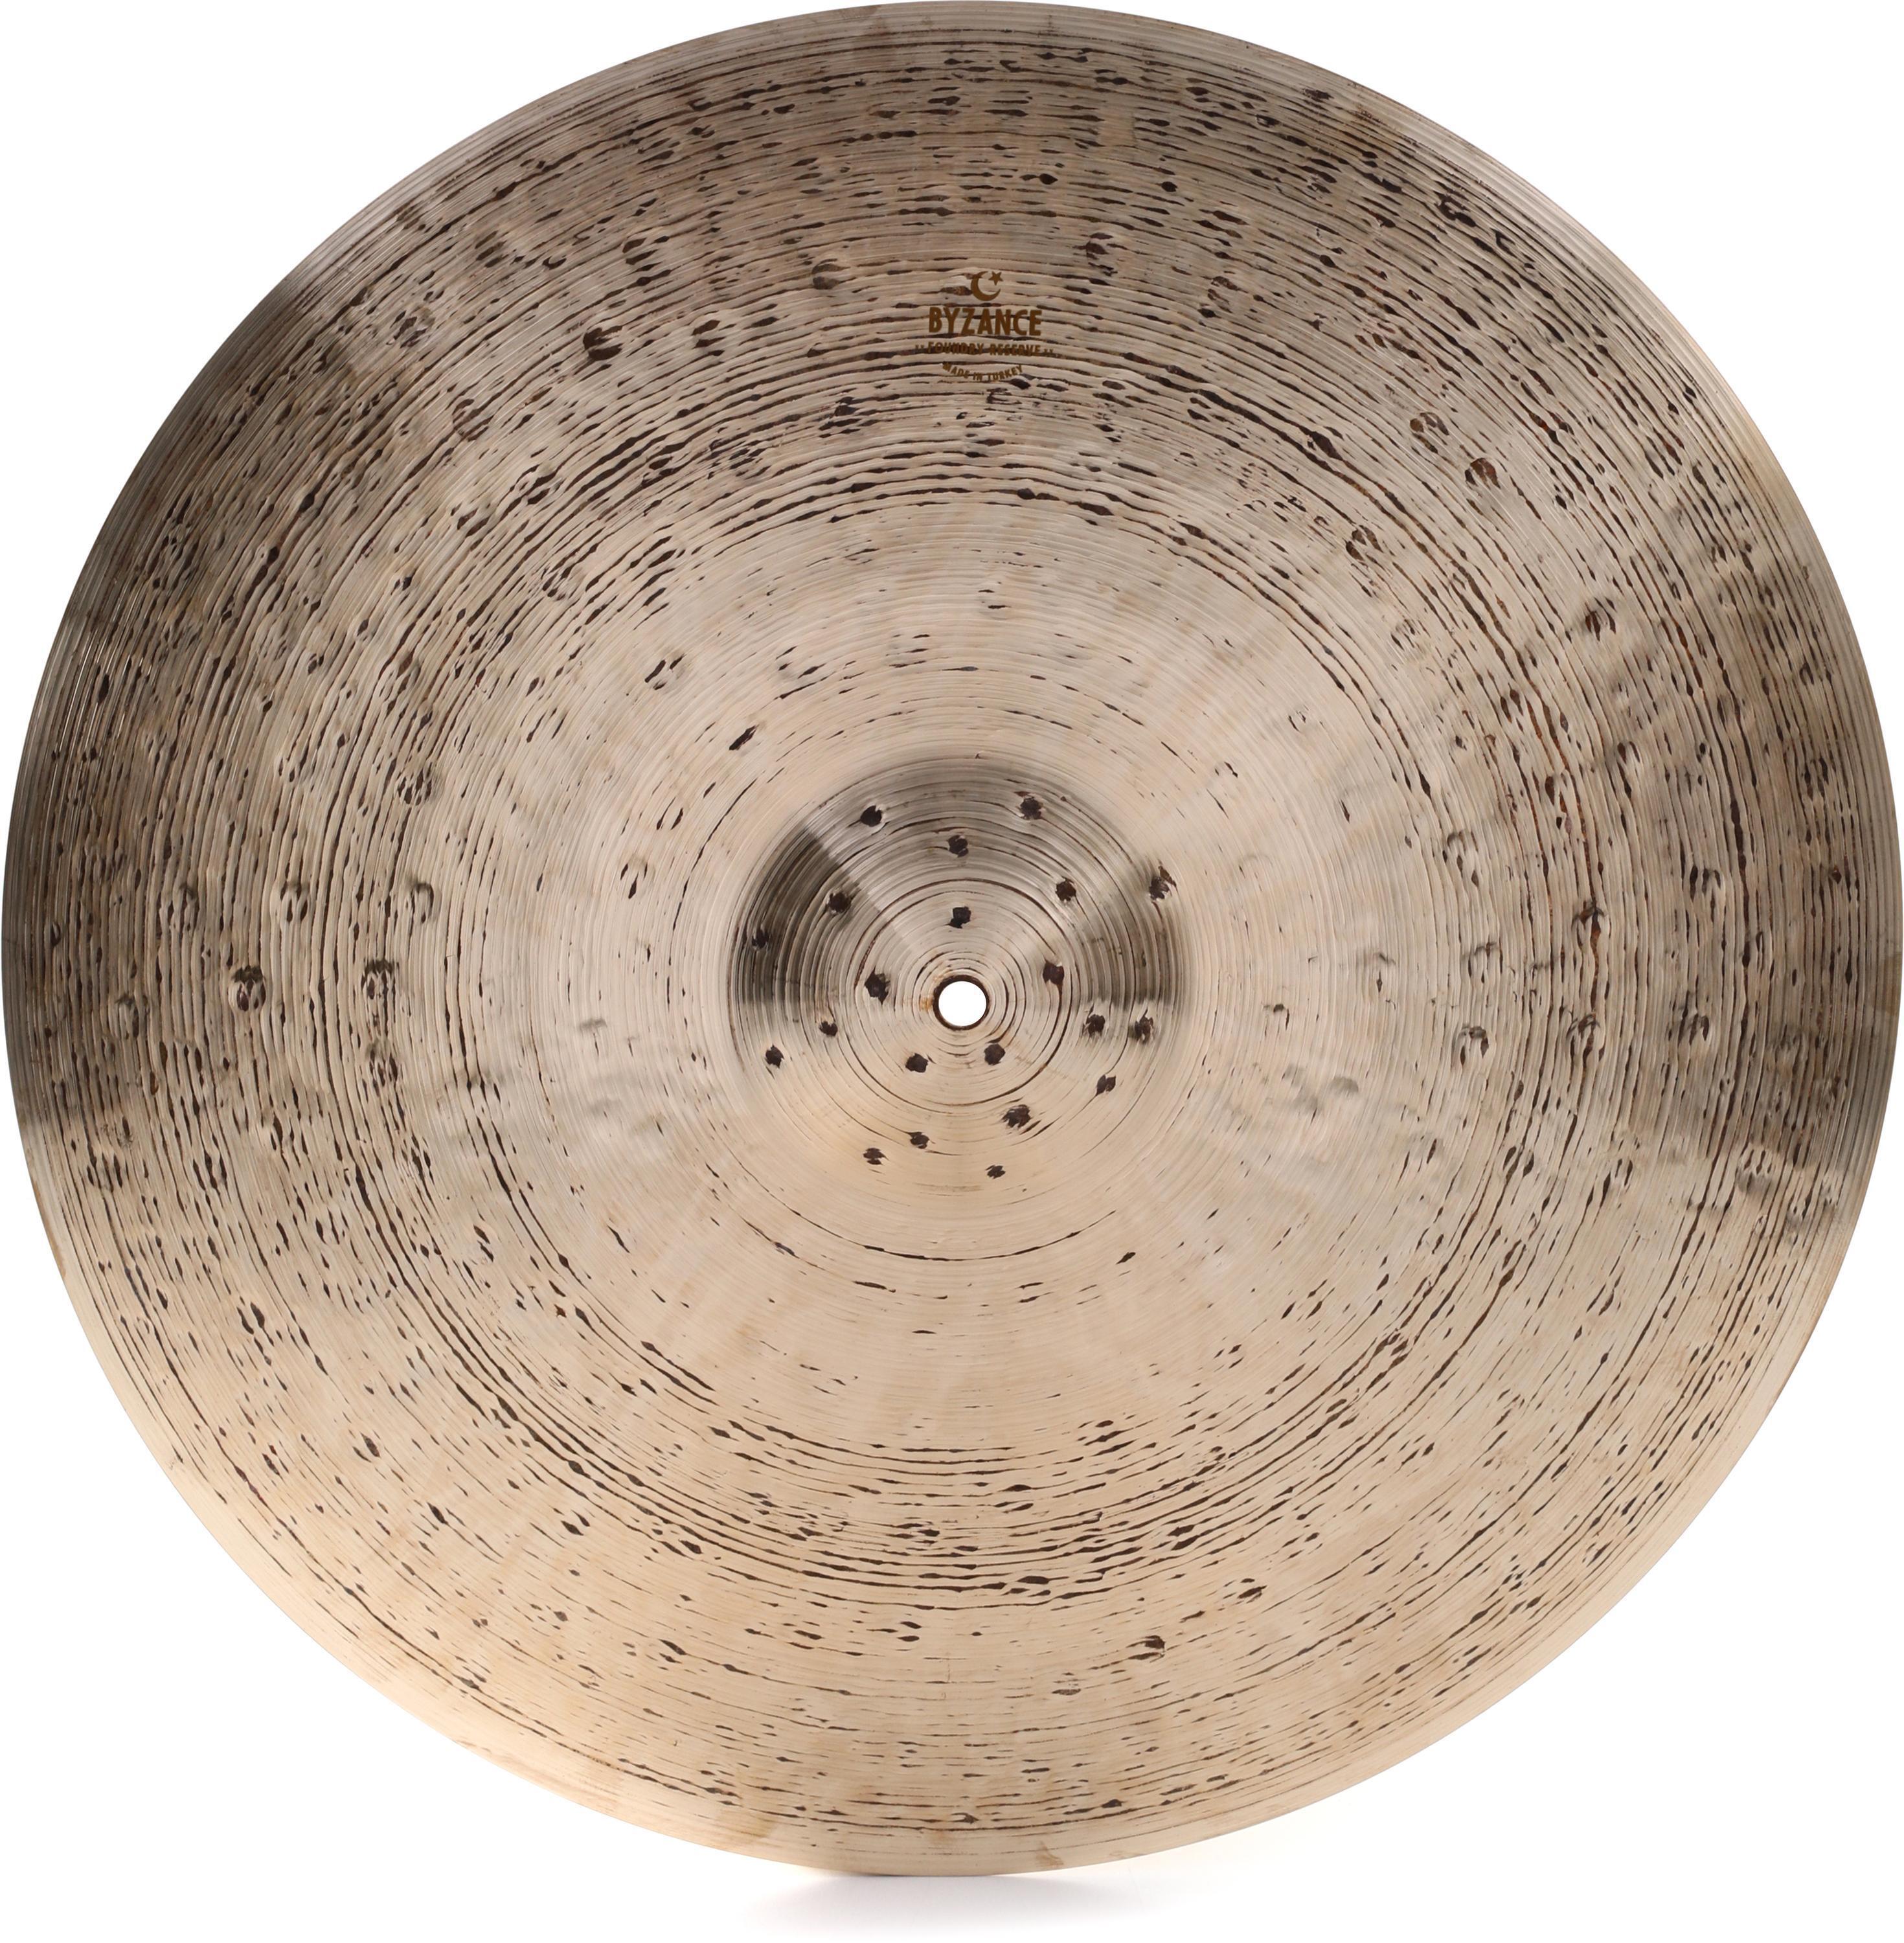 Meinl Cymbals 22 inch Byzance Foundry Reserve Ride Cymbal | Sweetwater